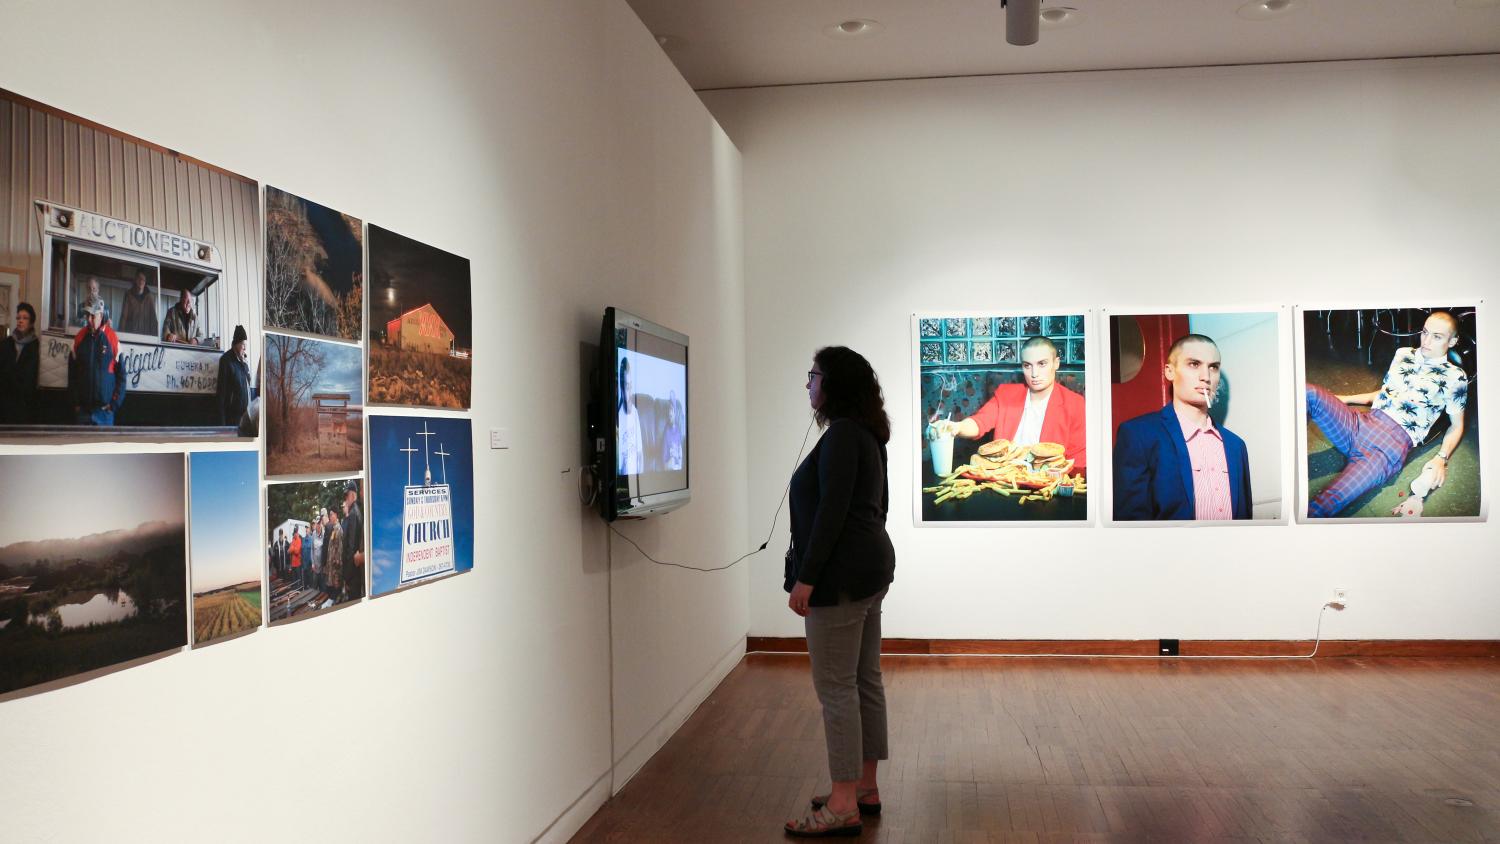 A woman stands in the art gallery at Krannert Art Museum, she is looking at a digital display while surrounded by paintings
